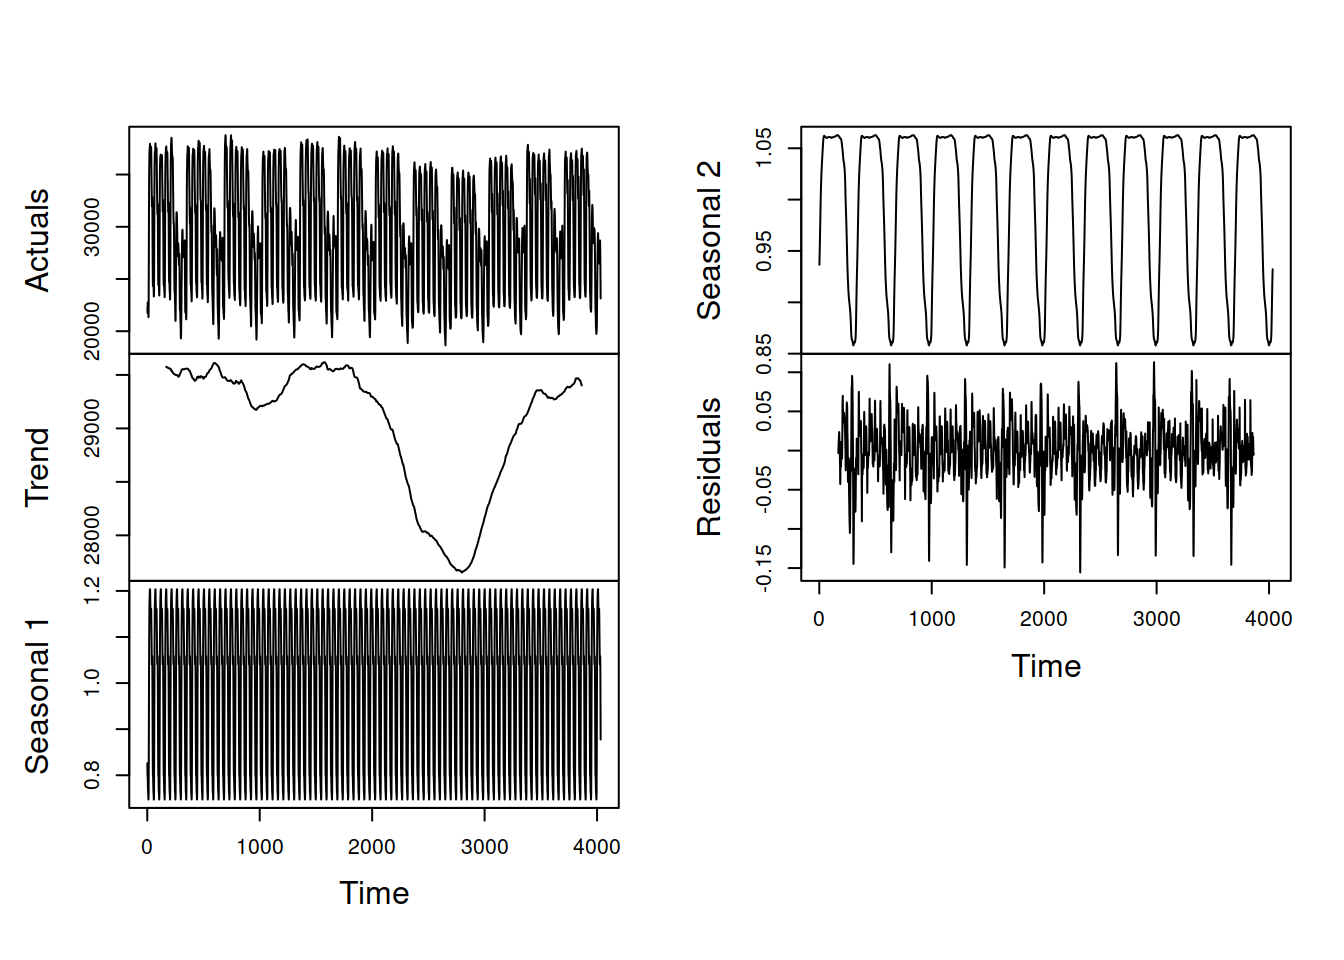 Decomposition of half-hourly electricity demand series according to the multiple seasonal classical decomposition.